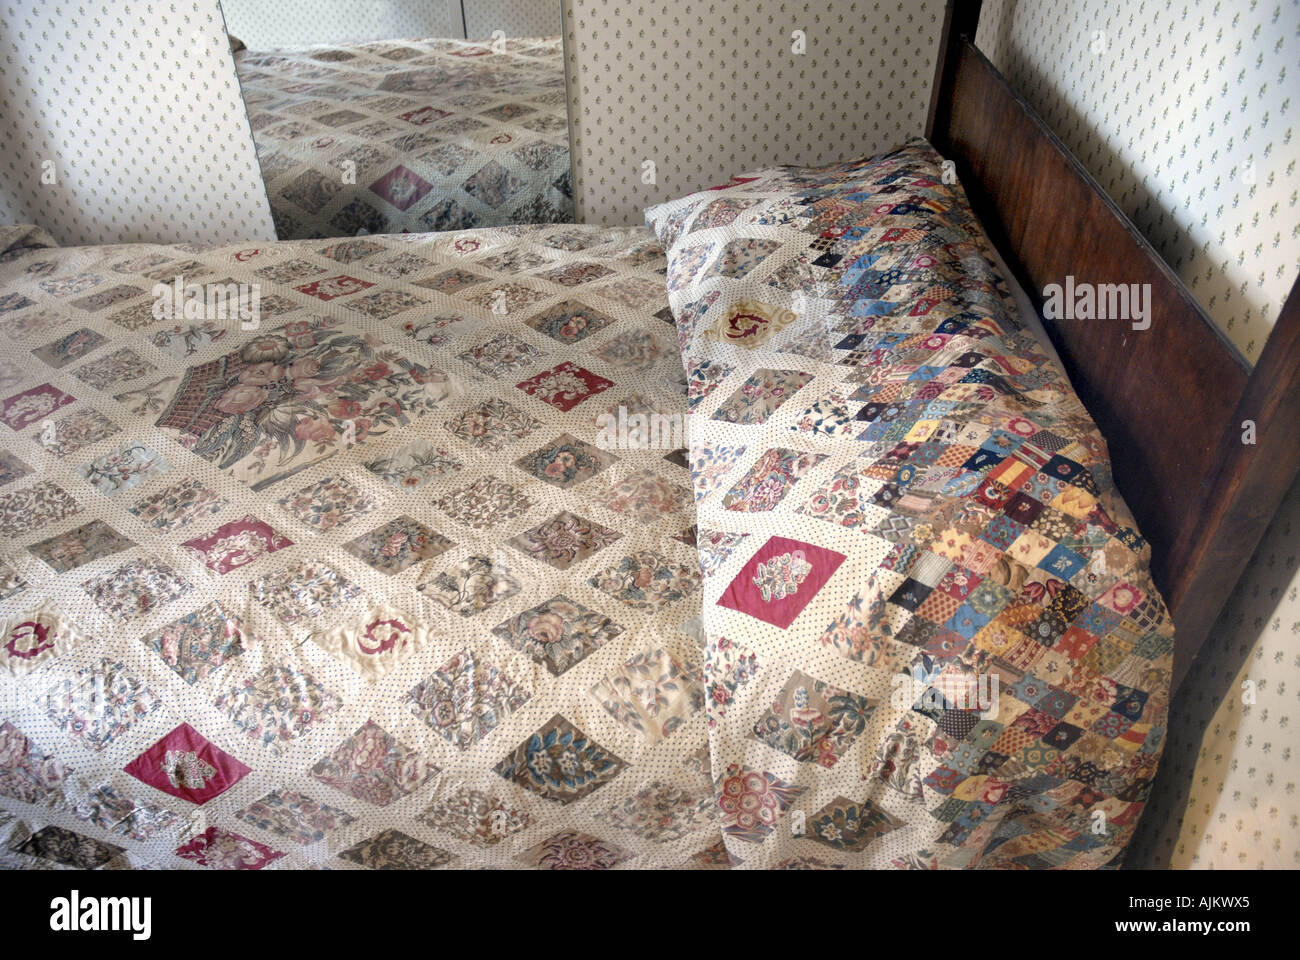 Patchwork coverlet or quilt made by Jane Austen and her mother and sister Cassandra between 1810 and 1812 at her house at Chawto Stock Photo